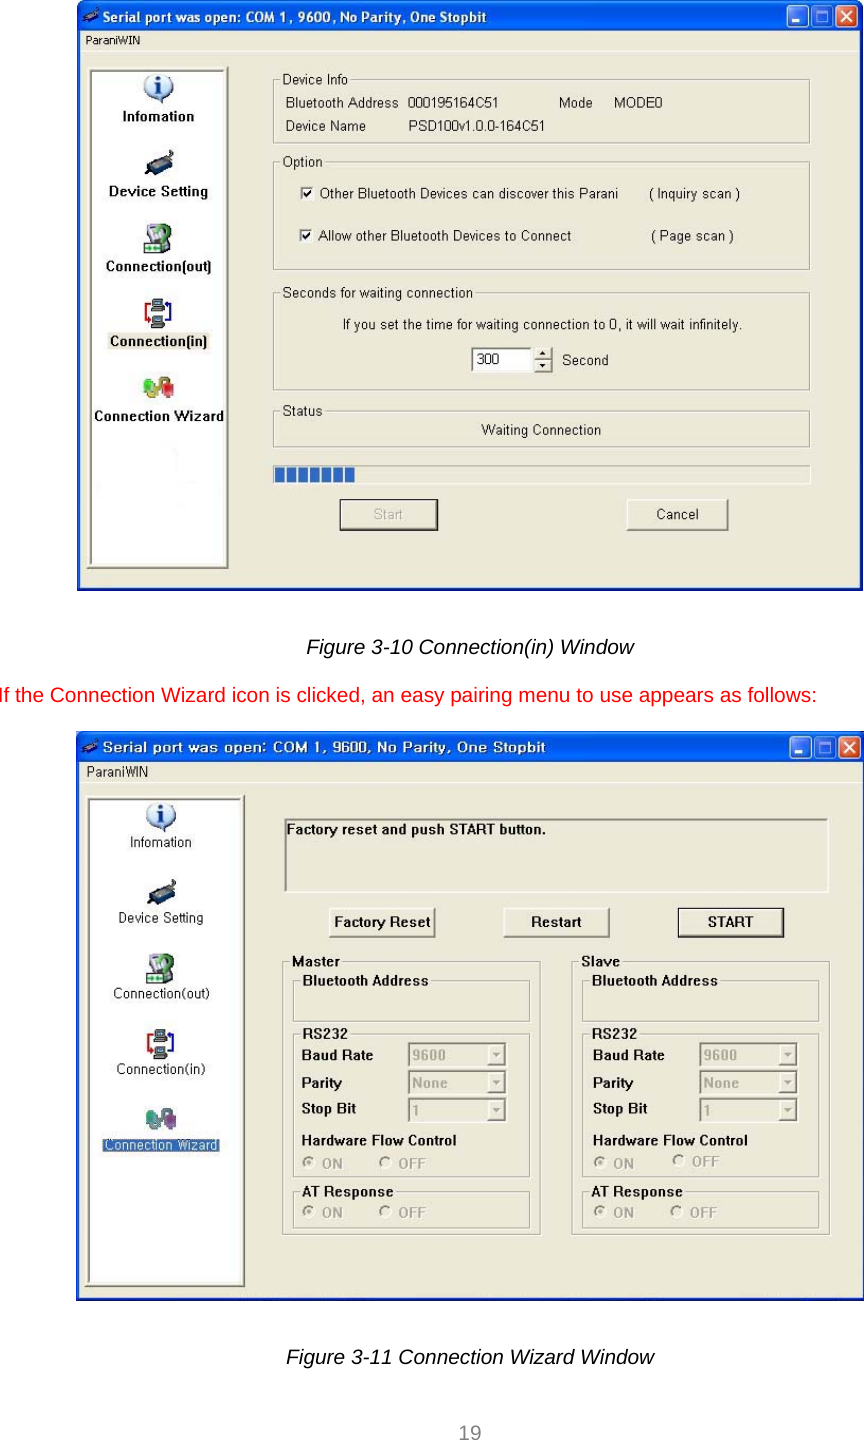  19   Figure 3-10 Connection(in) Window  If the Connection Wizard icon is clicked, an easy pairing menu to use appears as follows:    Figure 3-11 Connection Wizard Window 